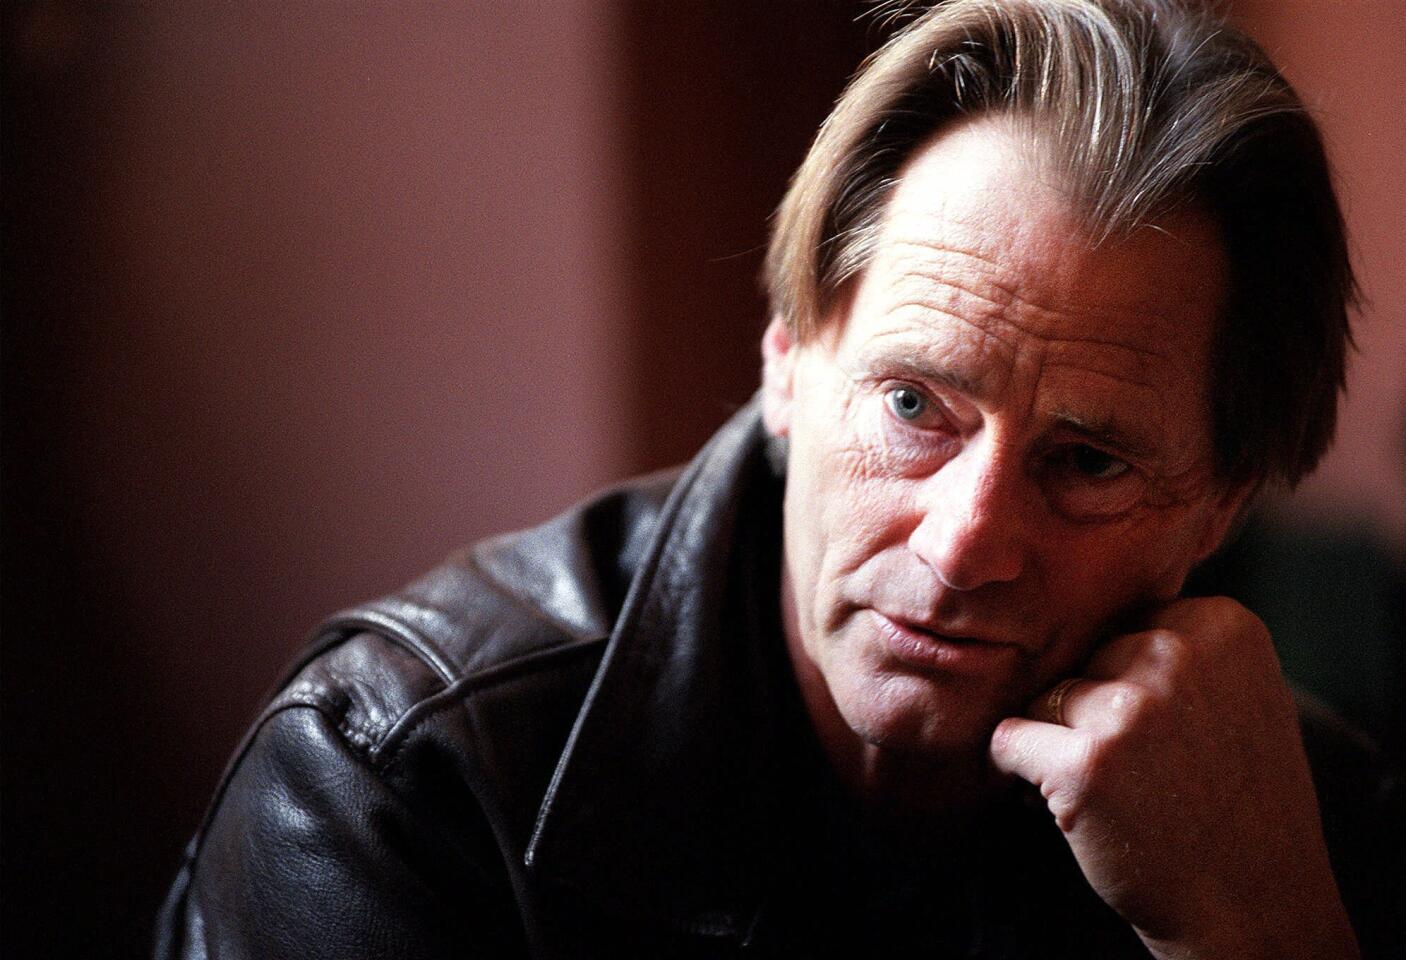 Sam Shepard, the bard of America’s flat highways, wide-open spaces and wounding, dysfunctional families died July 27, 2017, in his home in Kentucky from complications from Lou Gehrig’s disease. He was 73. Read more